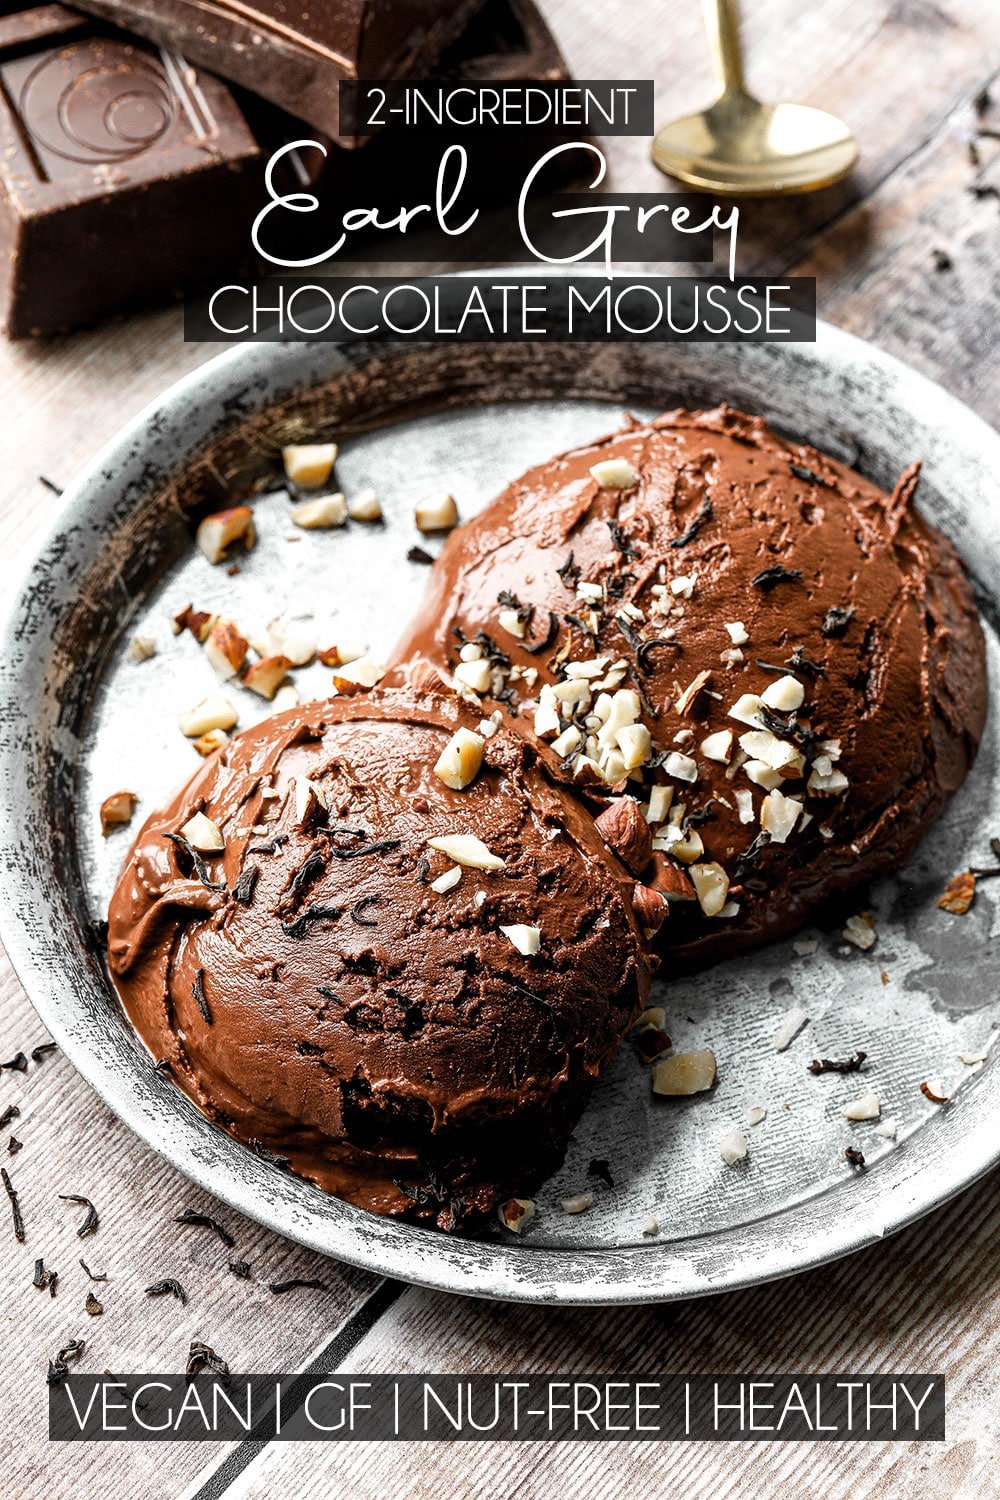 2-Ingredient Earl Grey Chocolate Mousse